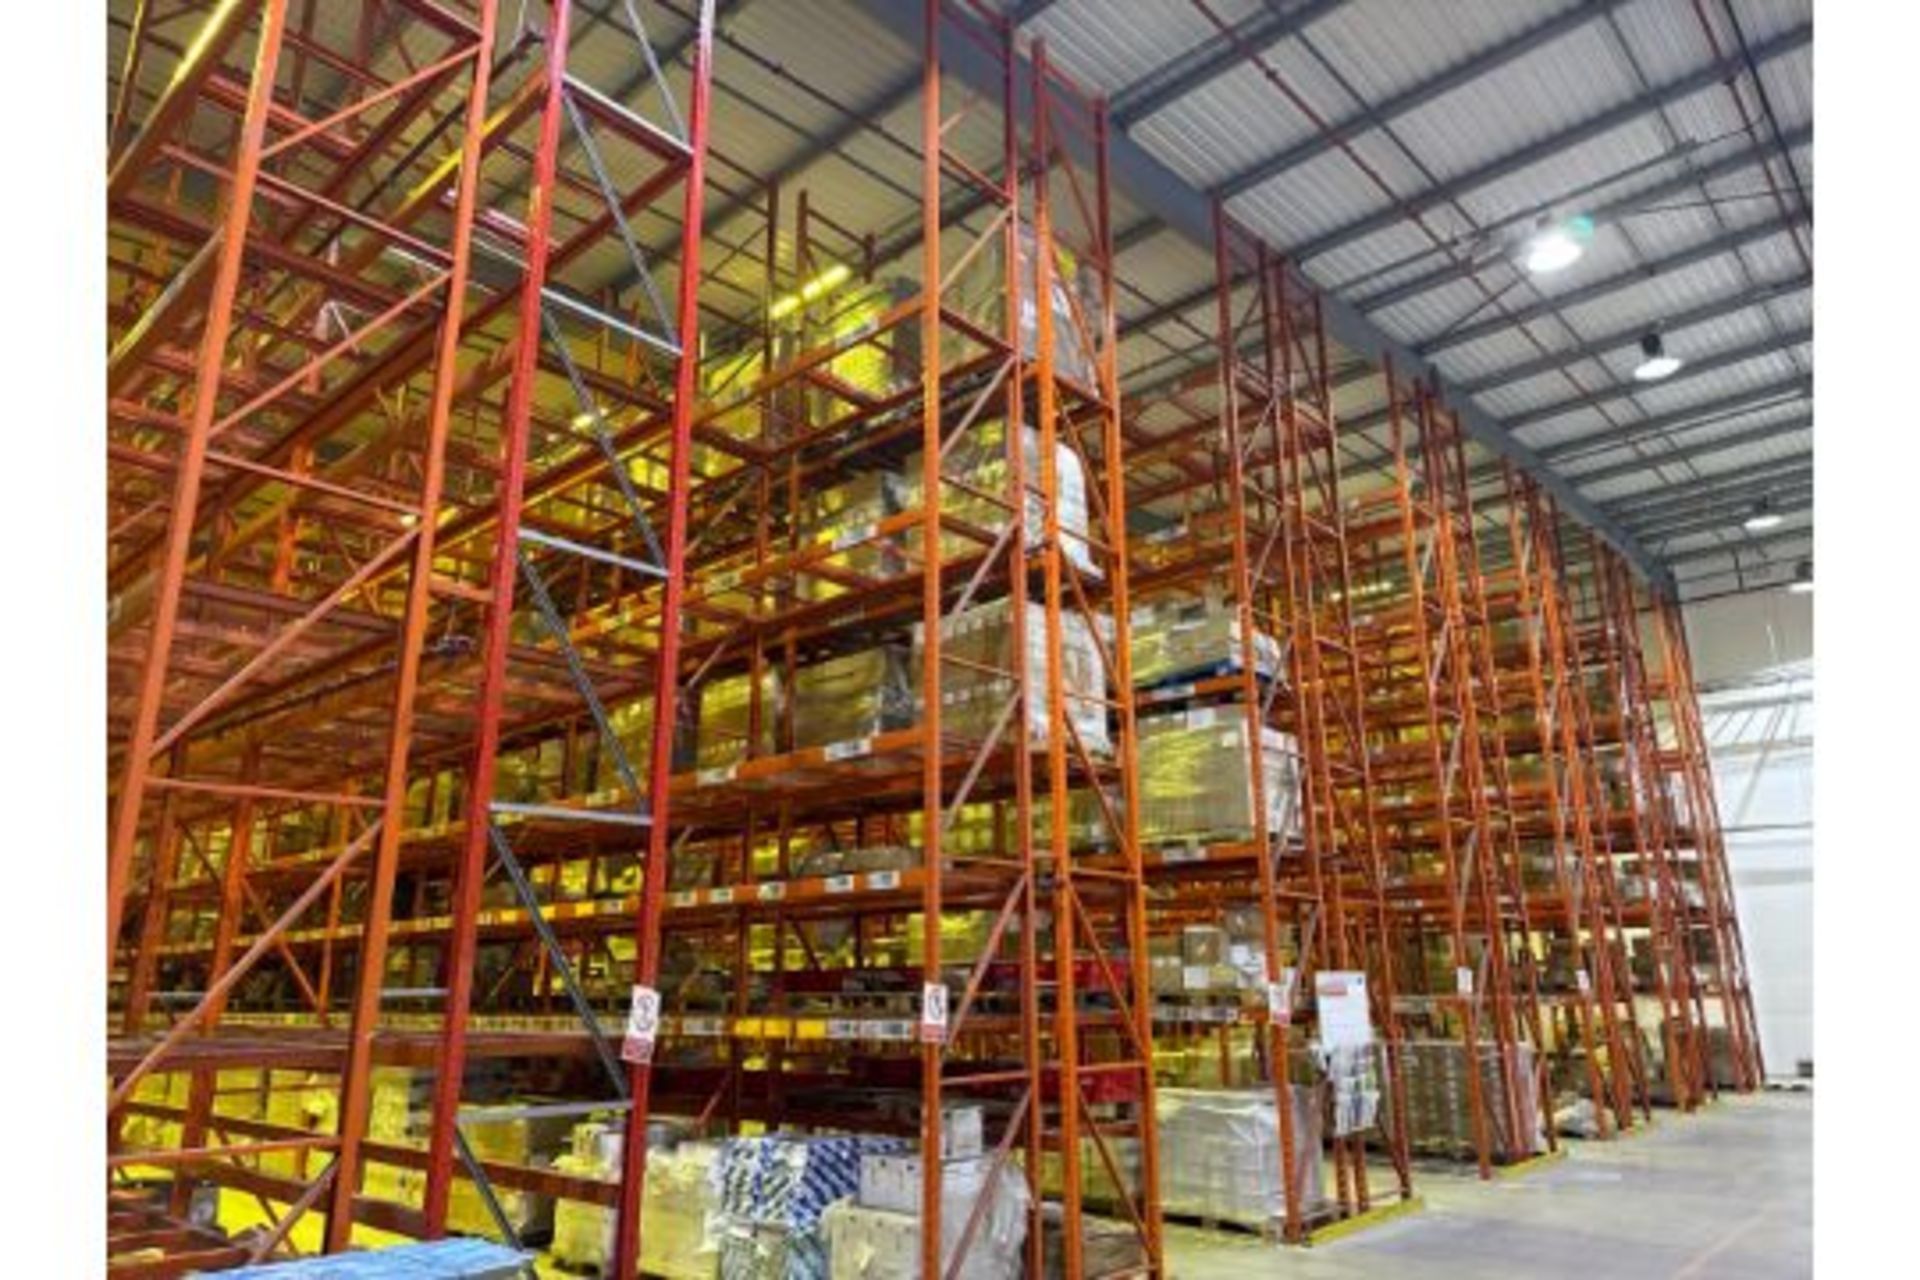 22 Bays Of Boltless Racking - Image 9 of 9